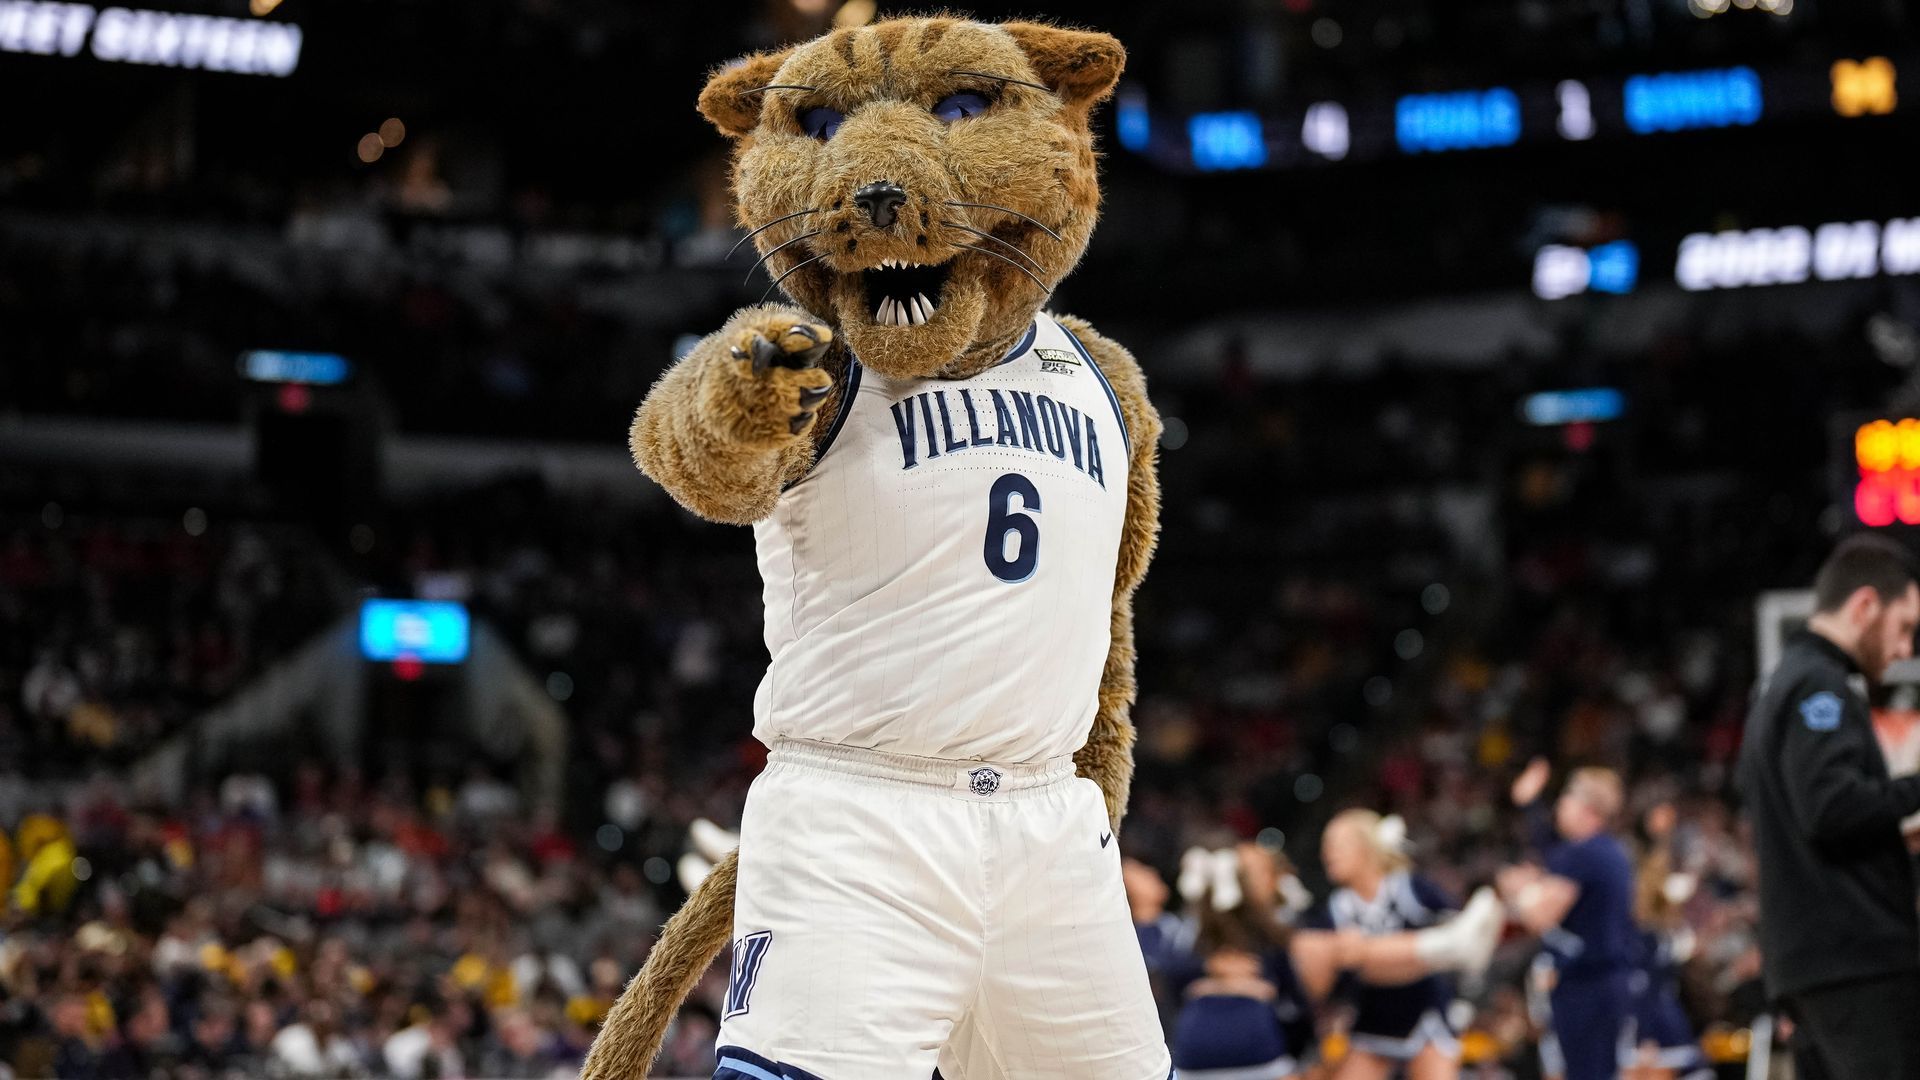 The Villanova Wildcat mascot performs during a timeout during the Sweet 16 round of the 2022 NCAA Mens Basketball Tournament held at AT&T Center on March 24, 2022 in San Antonio, Texas. 